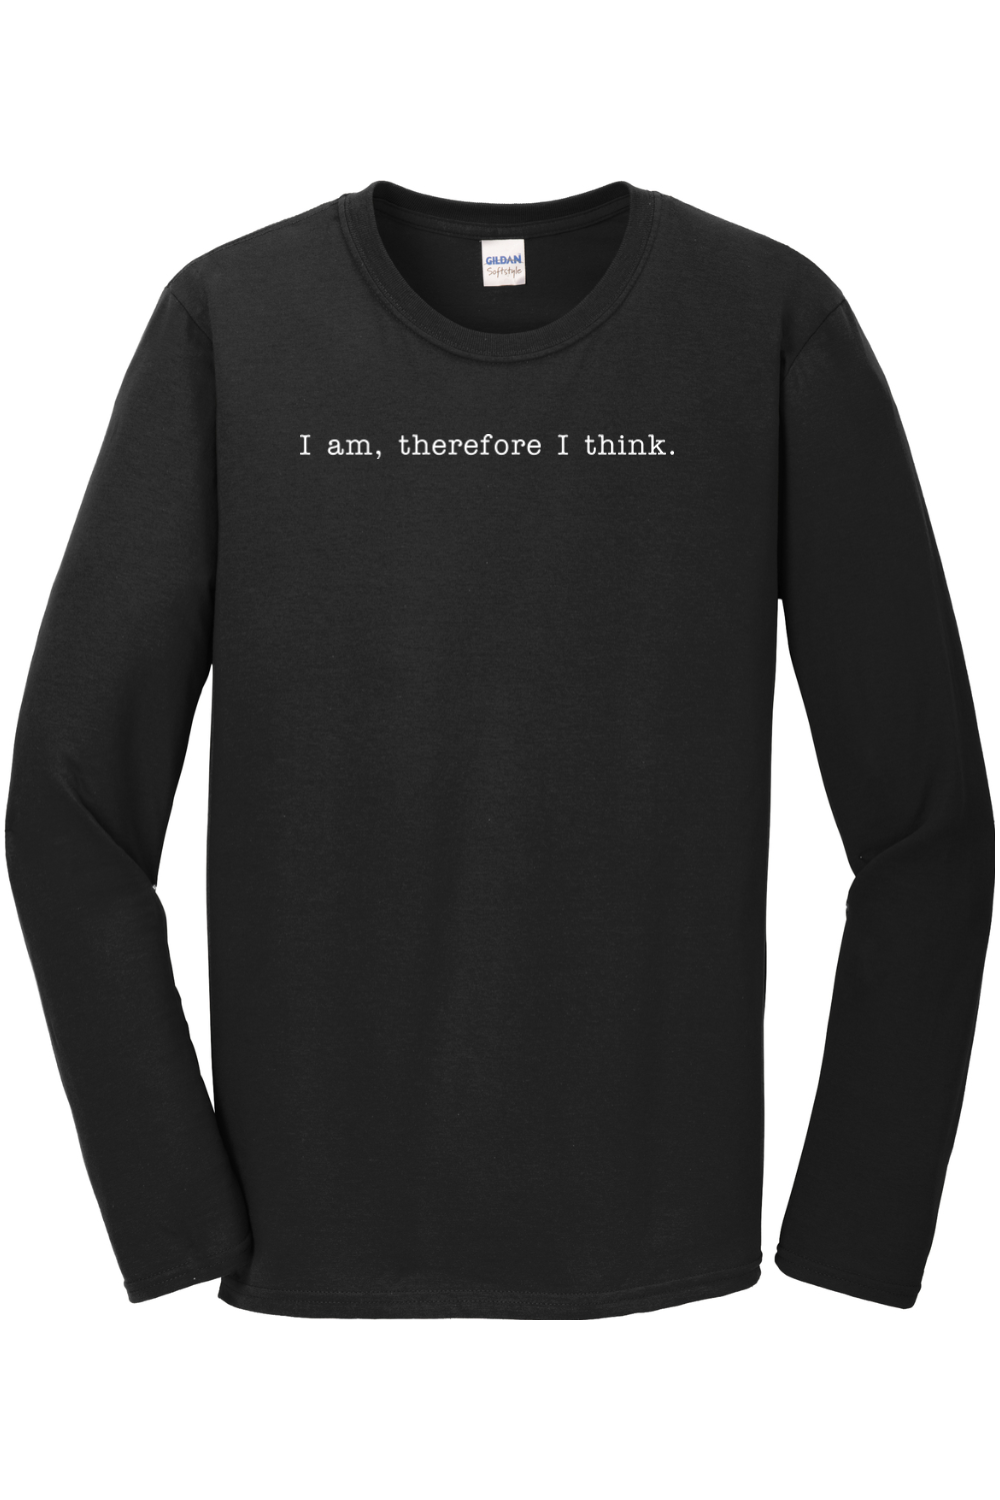 I am, Therefore I Think - Realism Philosophy Long Sleeve